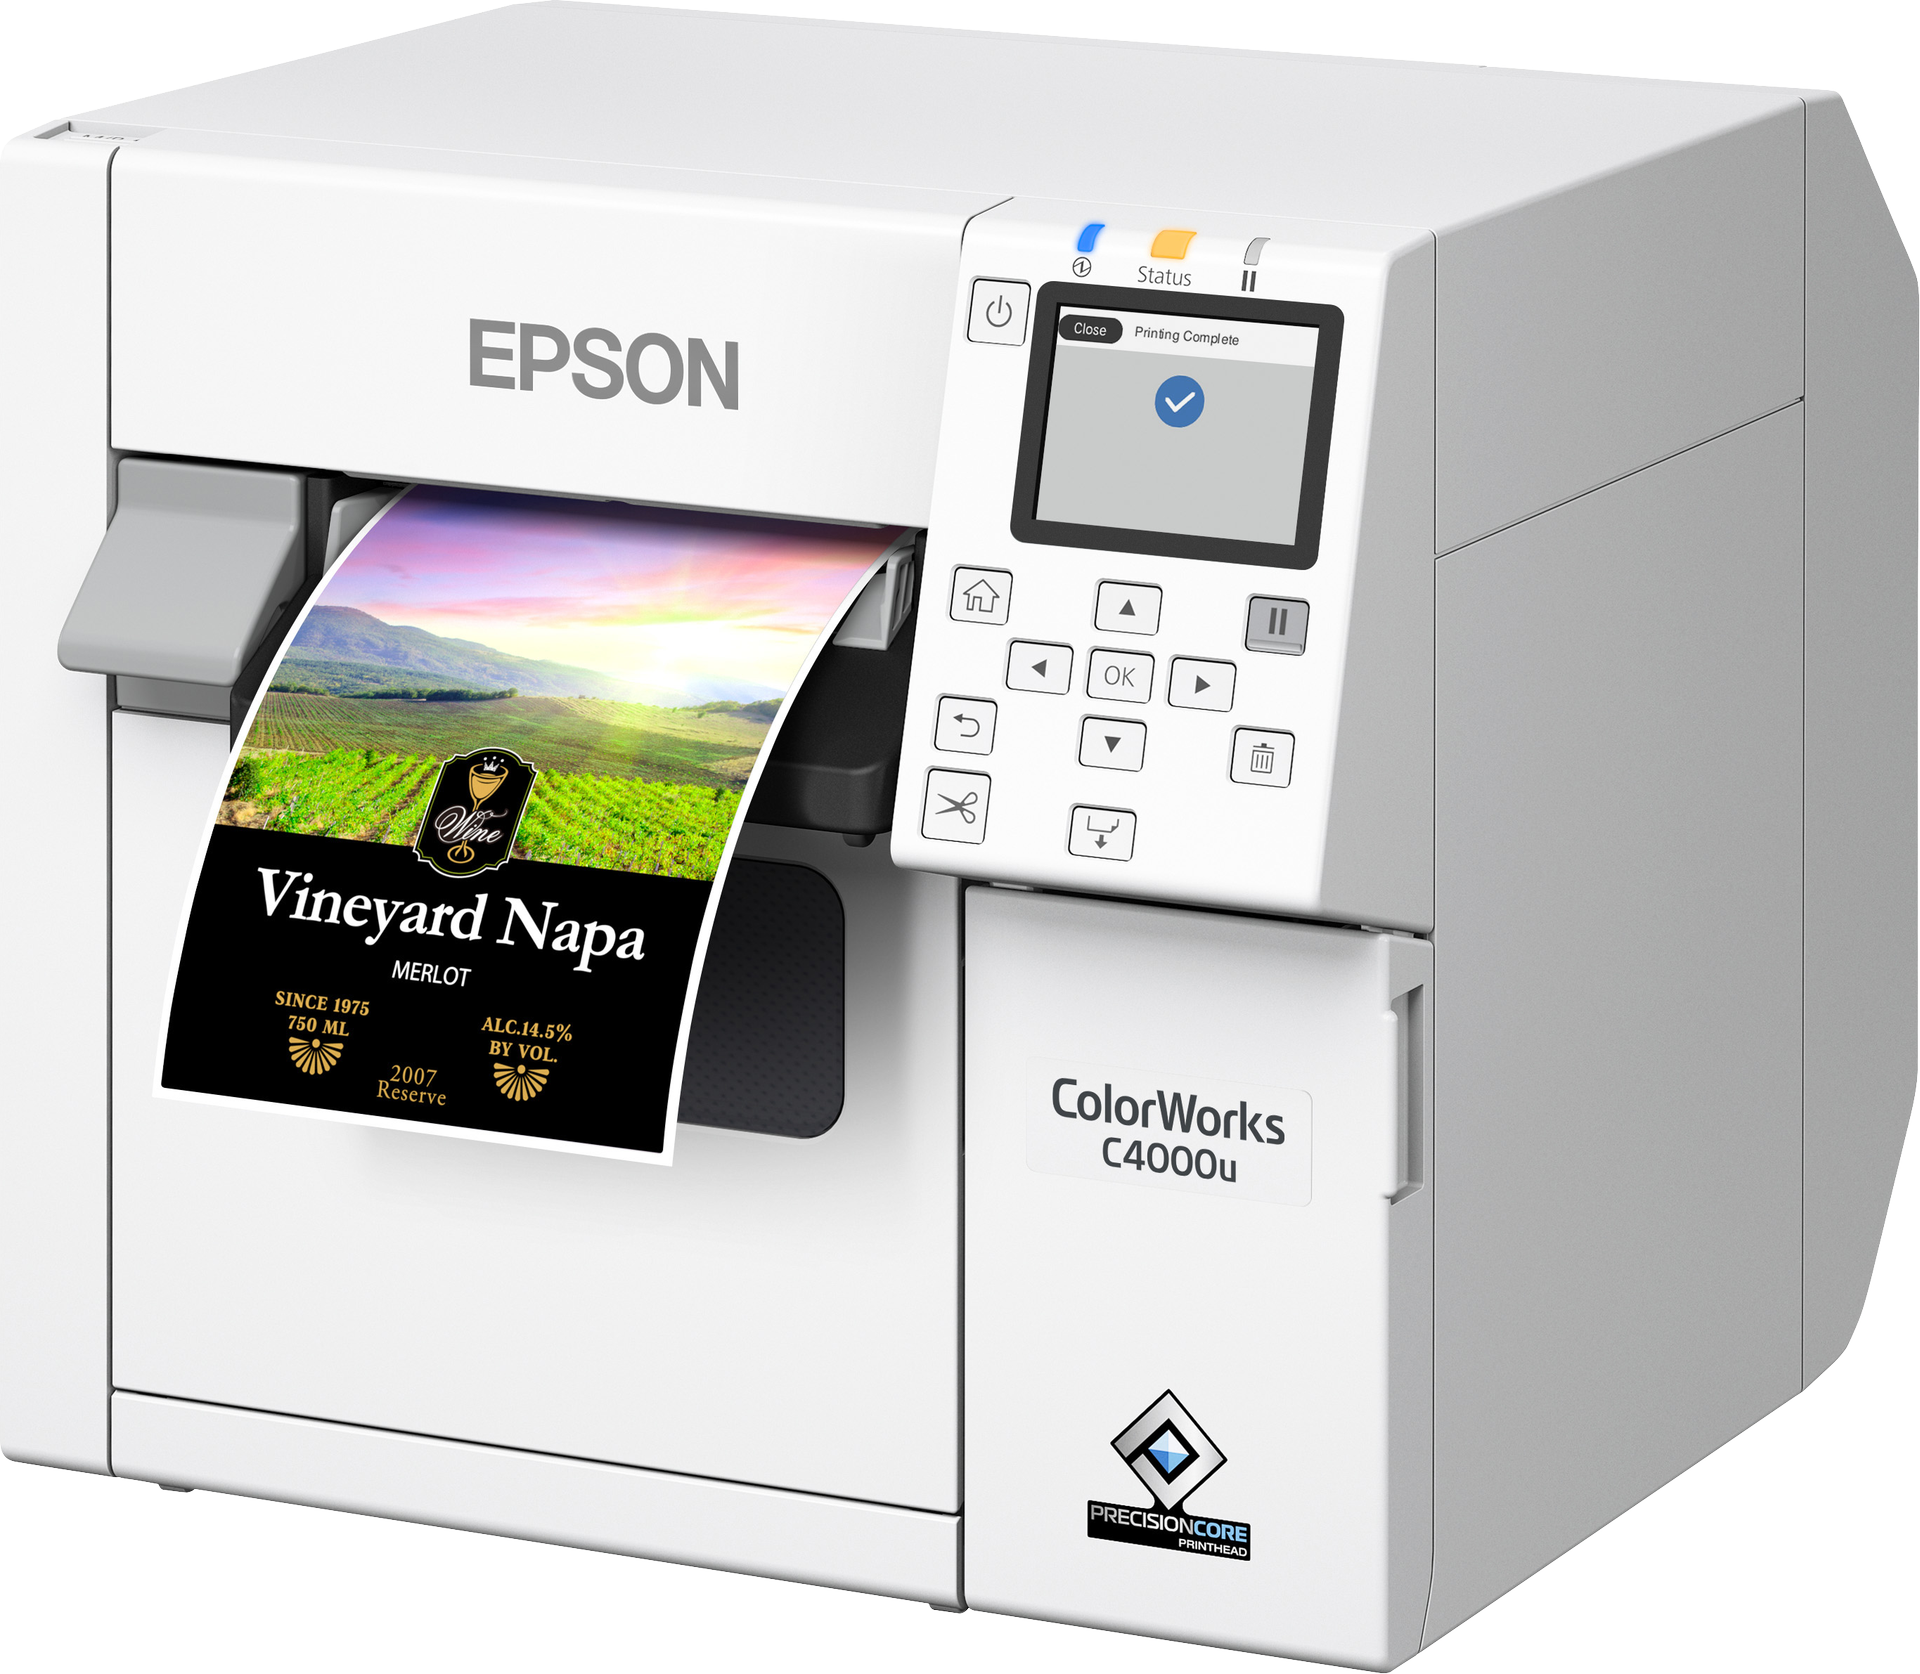 Featured image for “The new Epson Desktop color label printer CW-C4000”